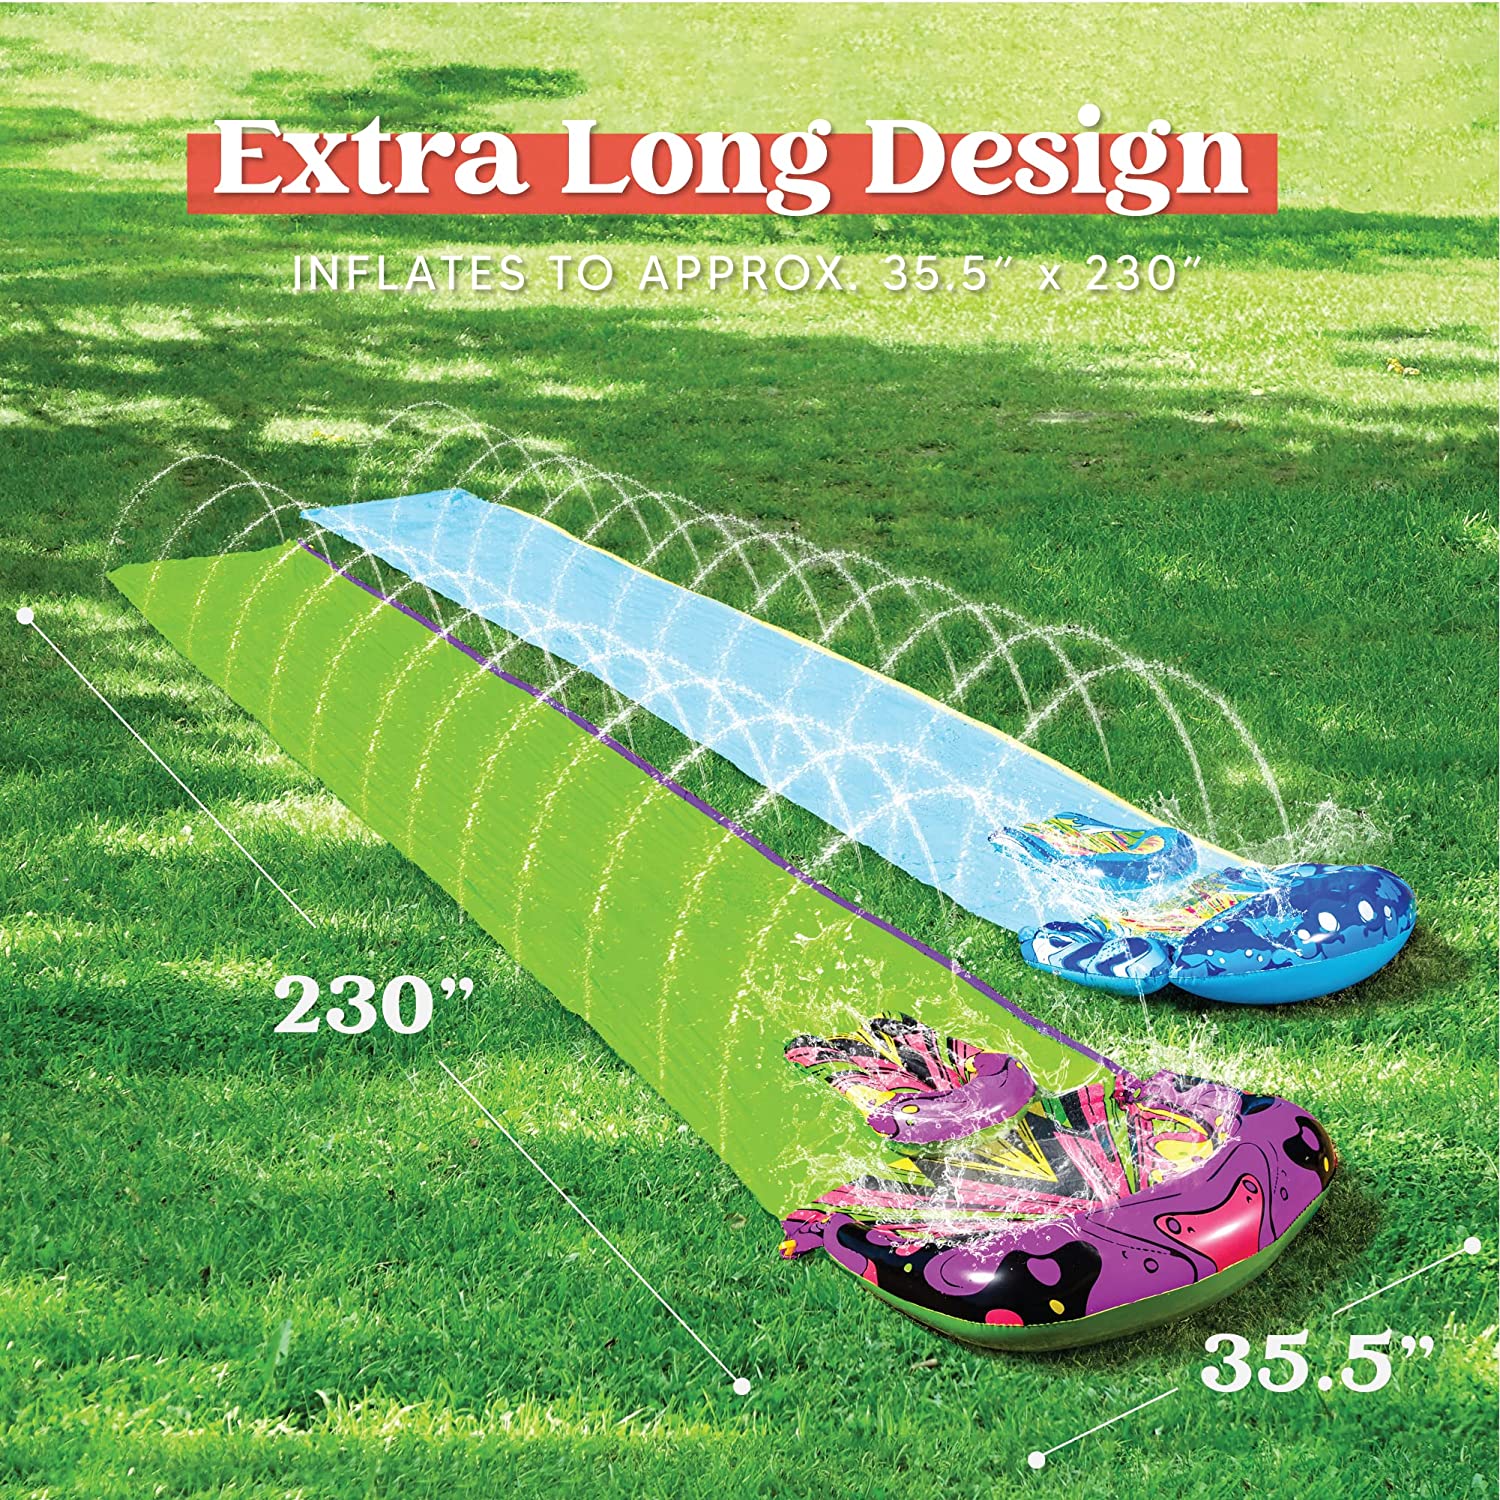 Terra 2 Pack 20ft x 35.5in Slip and Slide Water Slide with Bodyboards, Summer Toy with Build in Sprinkler for Outside Water Toys Fun Play